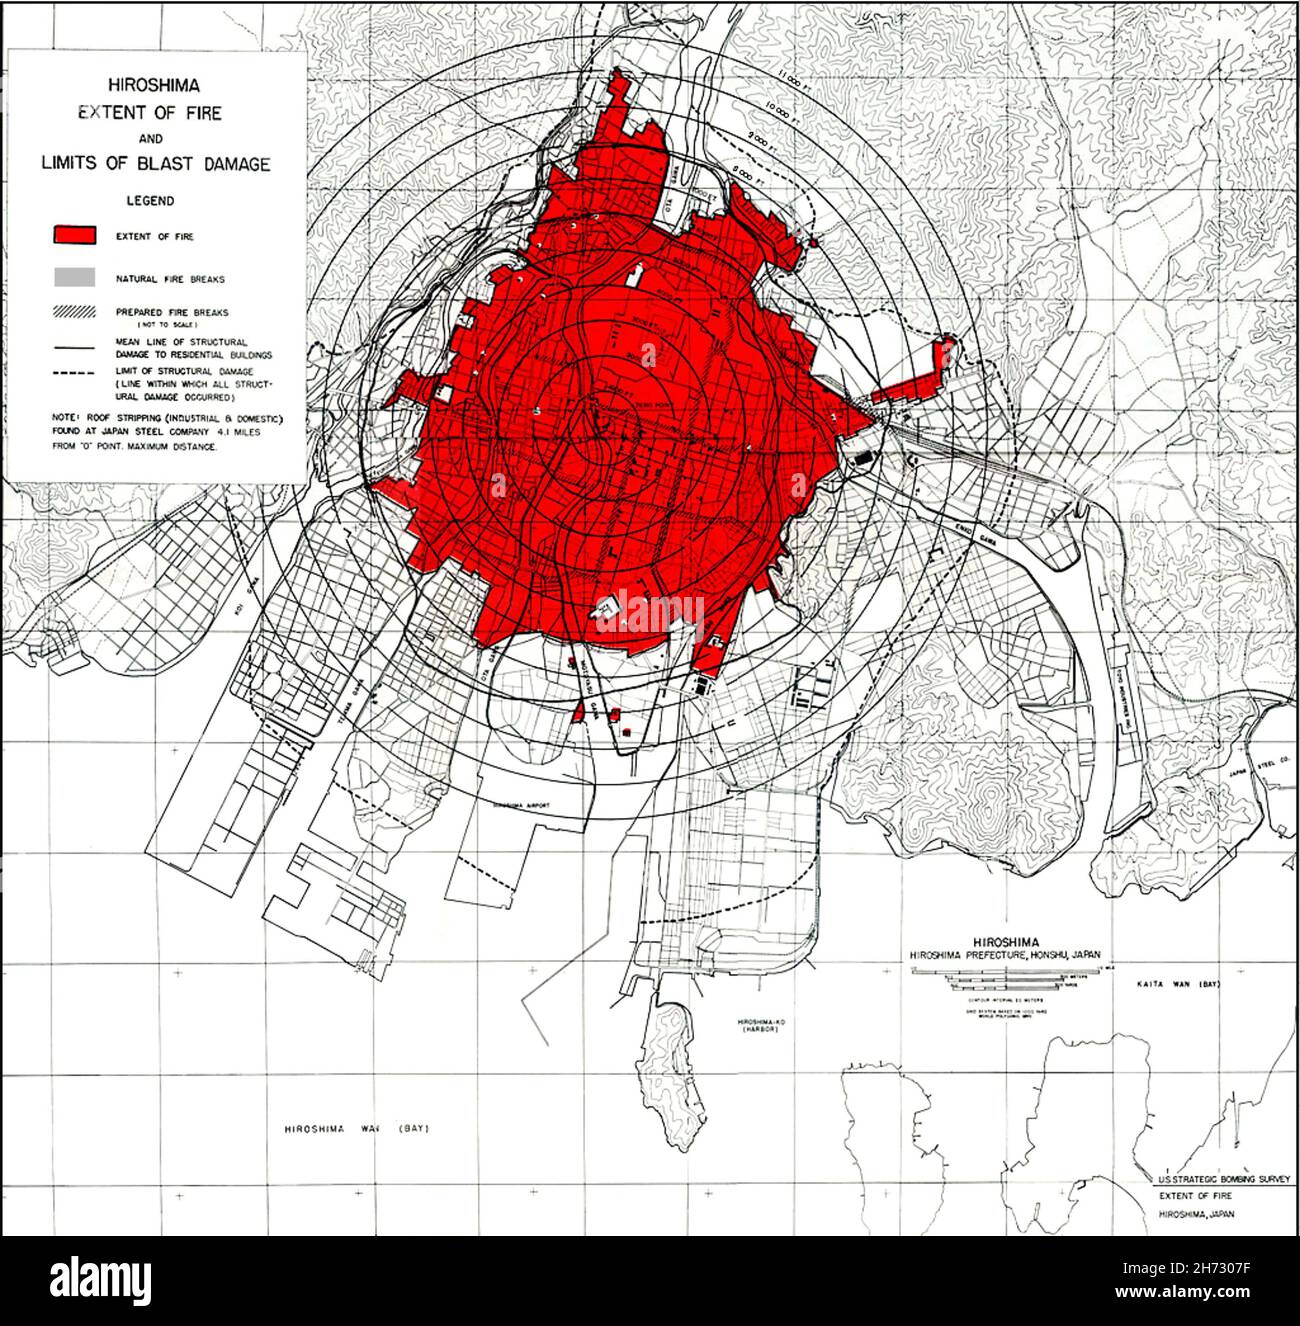 HIROSHIMA  American Strategic Bombing Survey chart of  January 1946 showing the extent of fire and blast damage  from the atomic bomb 'Little Boy'dropped on 6 August 1945 by the USAAF. Stock Photo